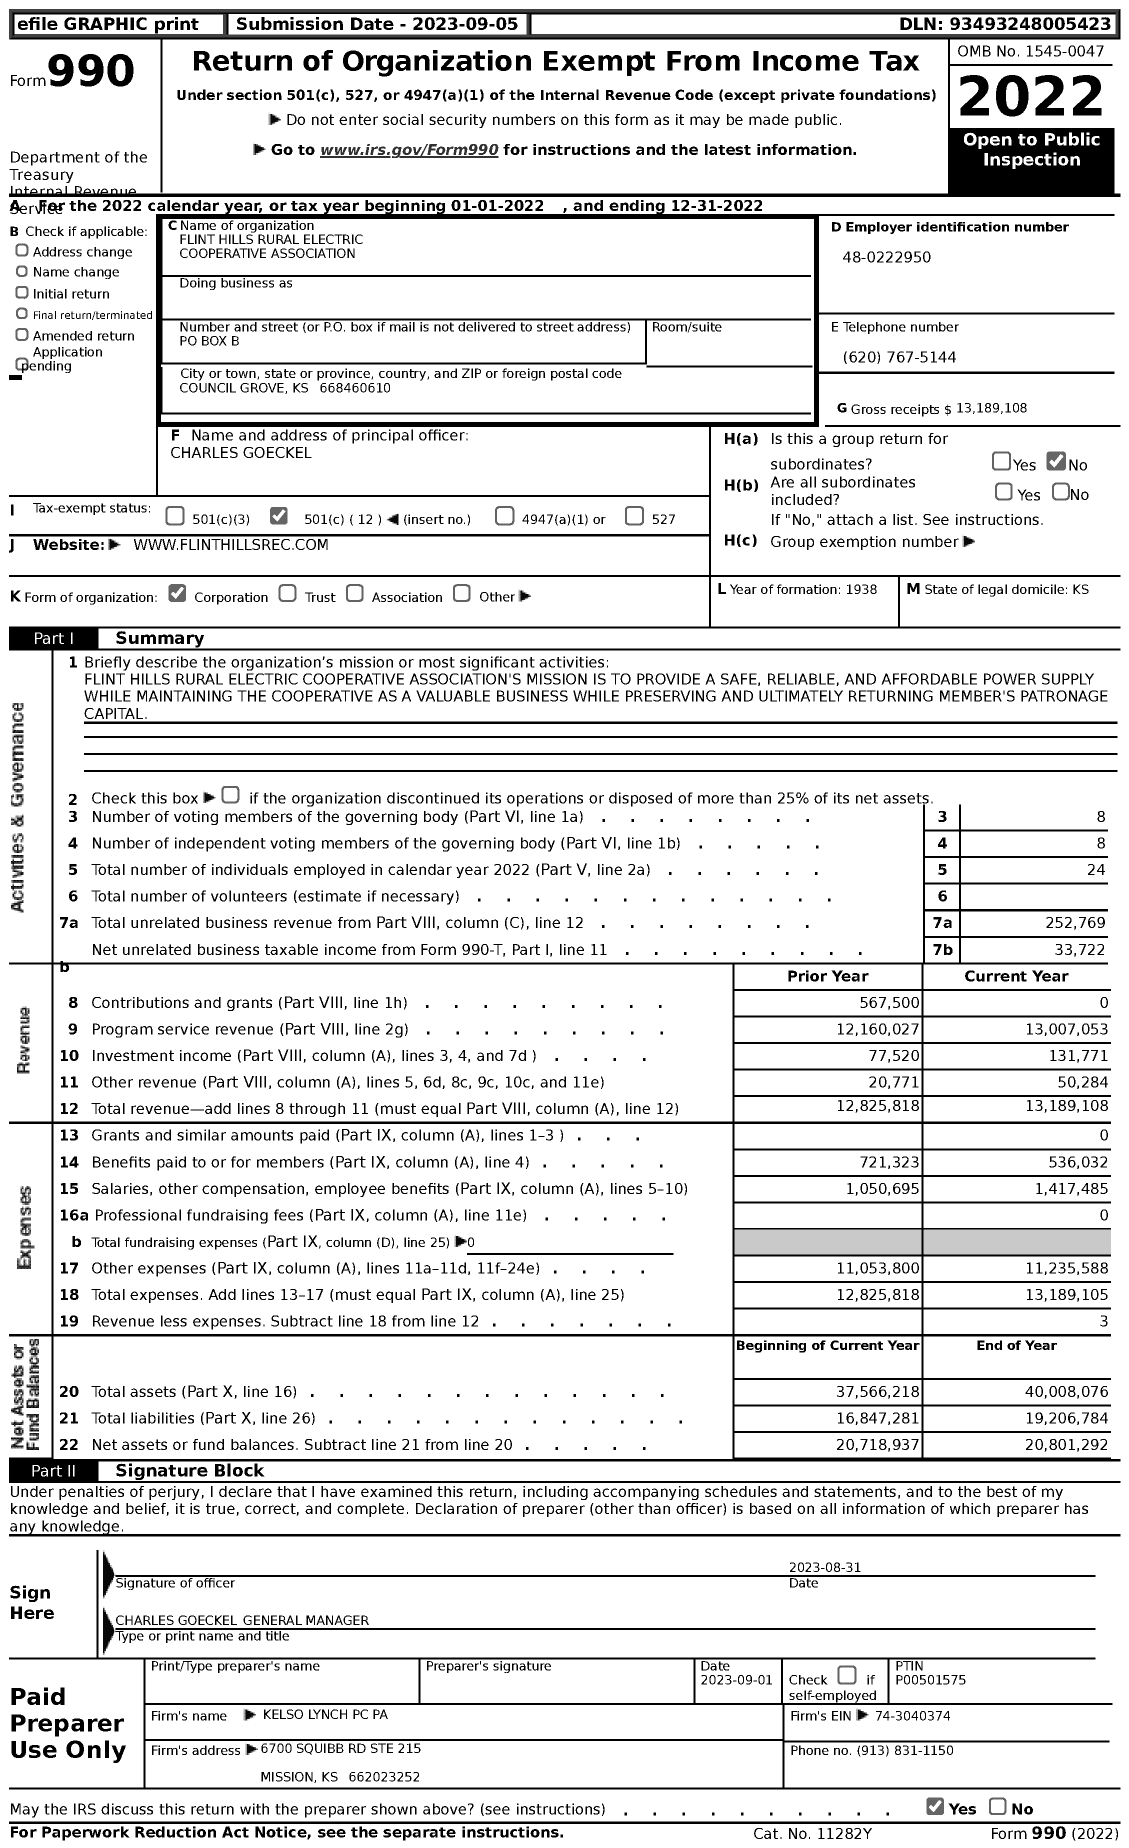 Image of first page of 2022 Form 990 for Flint Hills Rural Electric Cooperative Association